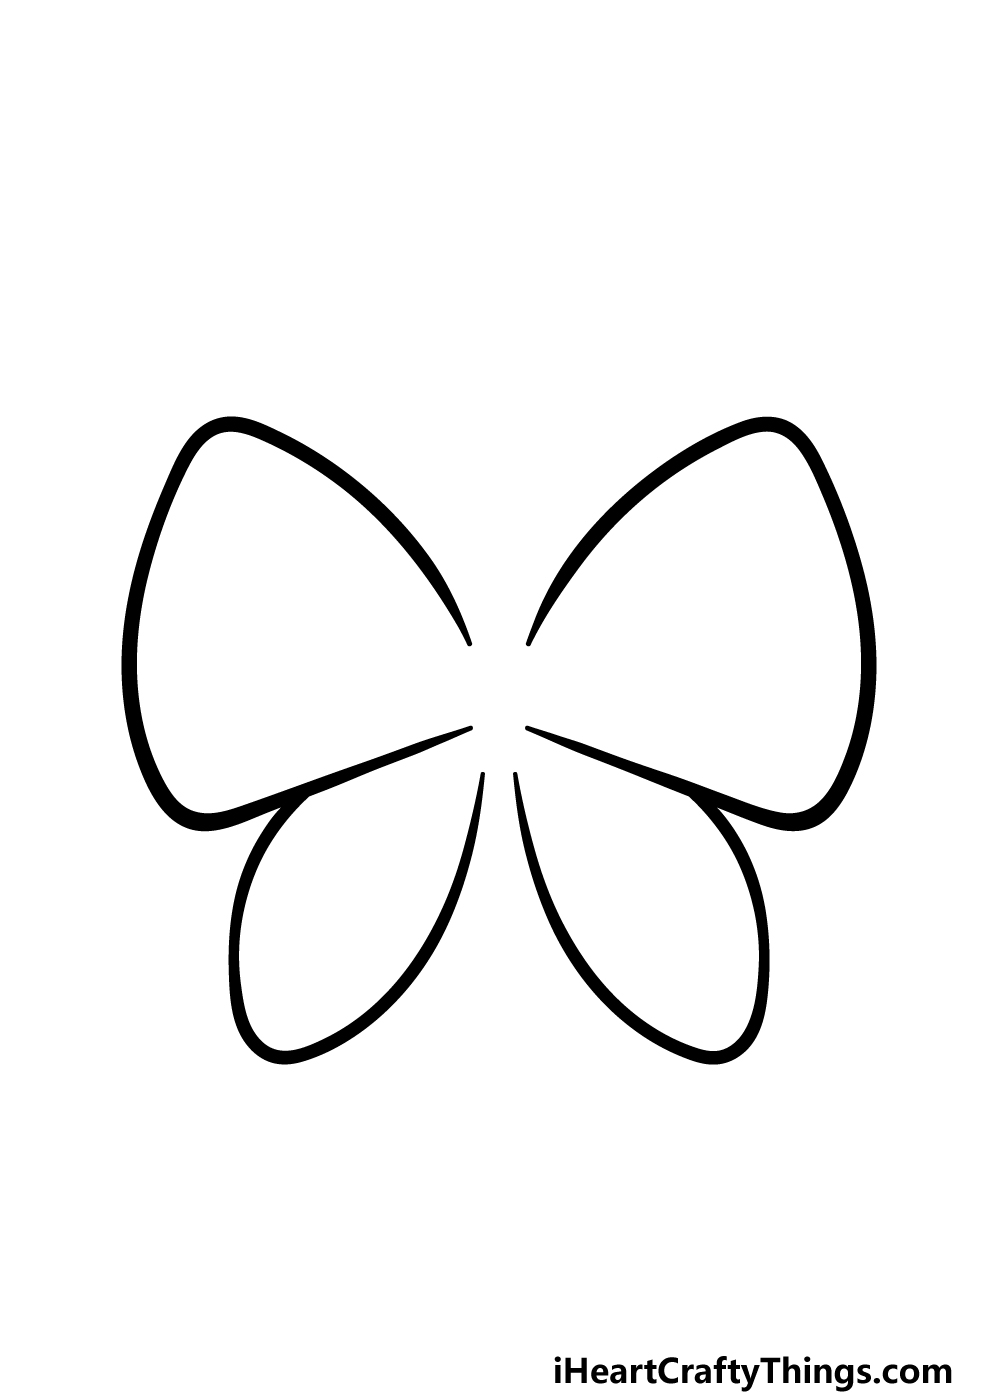 Butterfly Drawing - Draw an Easy Monarch Butterfly Today!